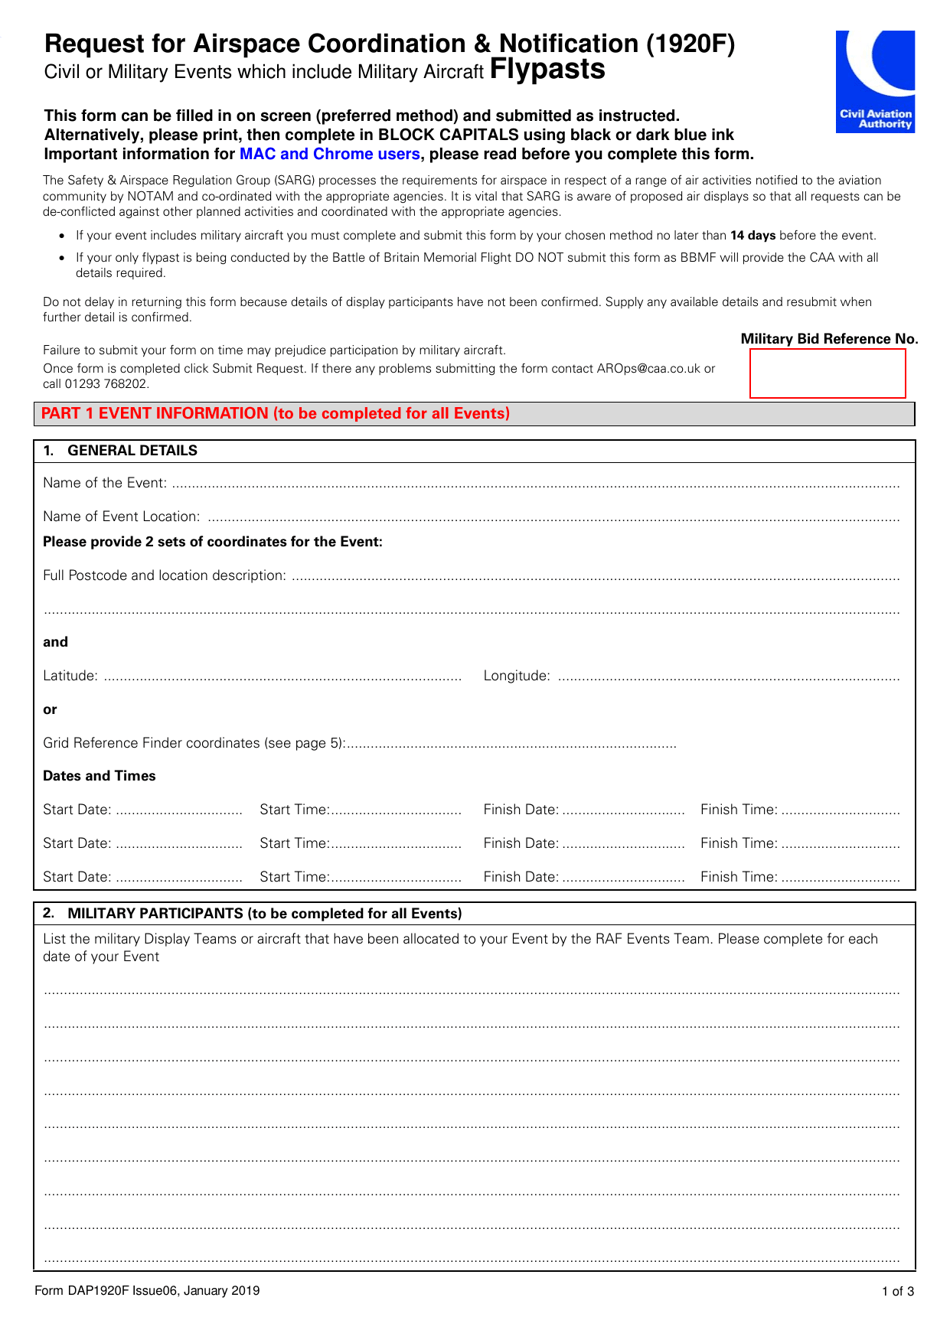 Form DAP1920F Request for Airspace Coordination and Notification - Flypasts - United Kingdom, Page 1